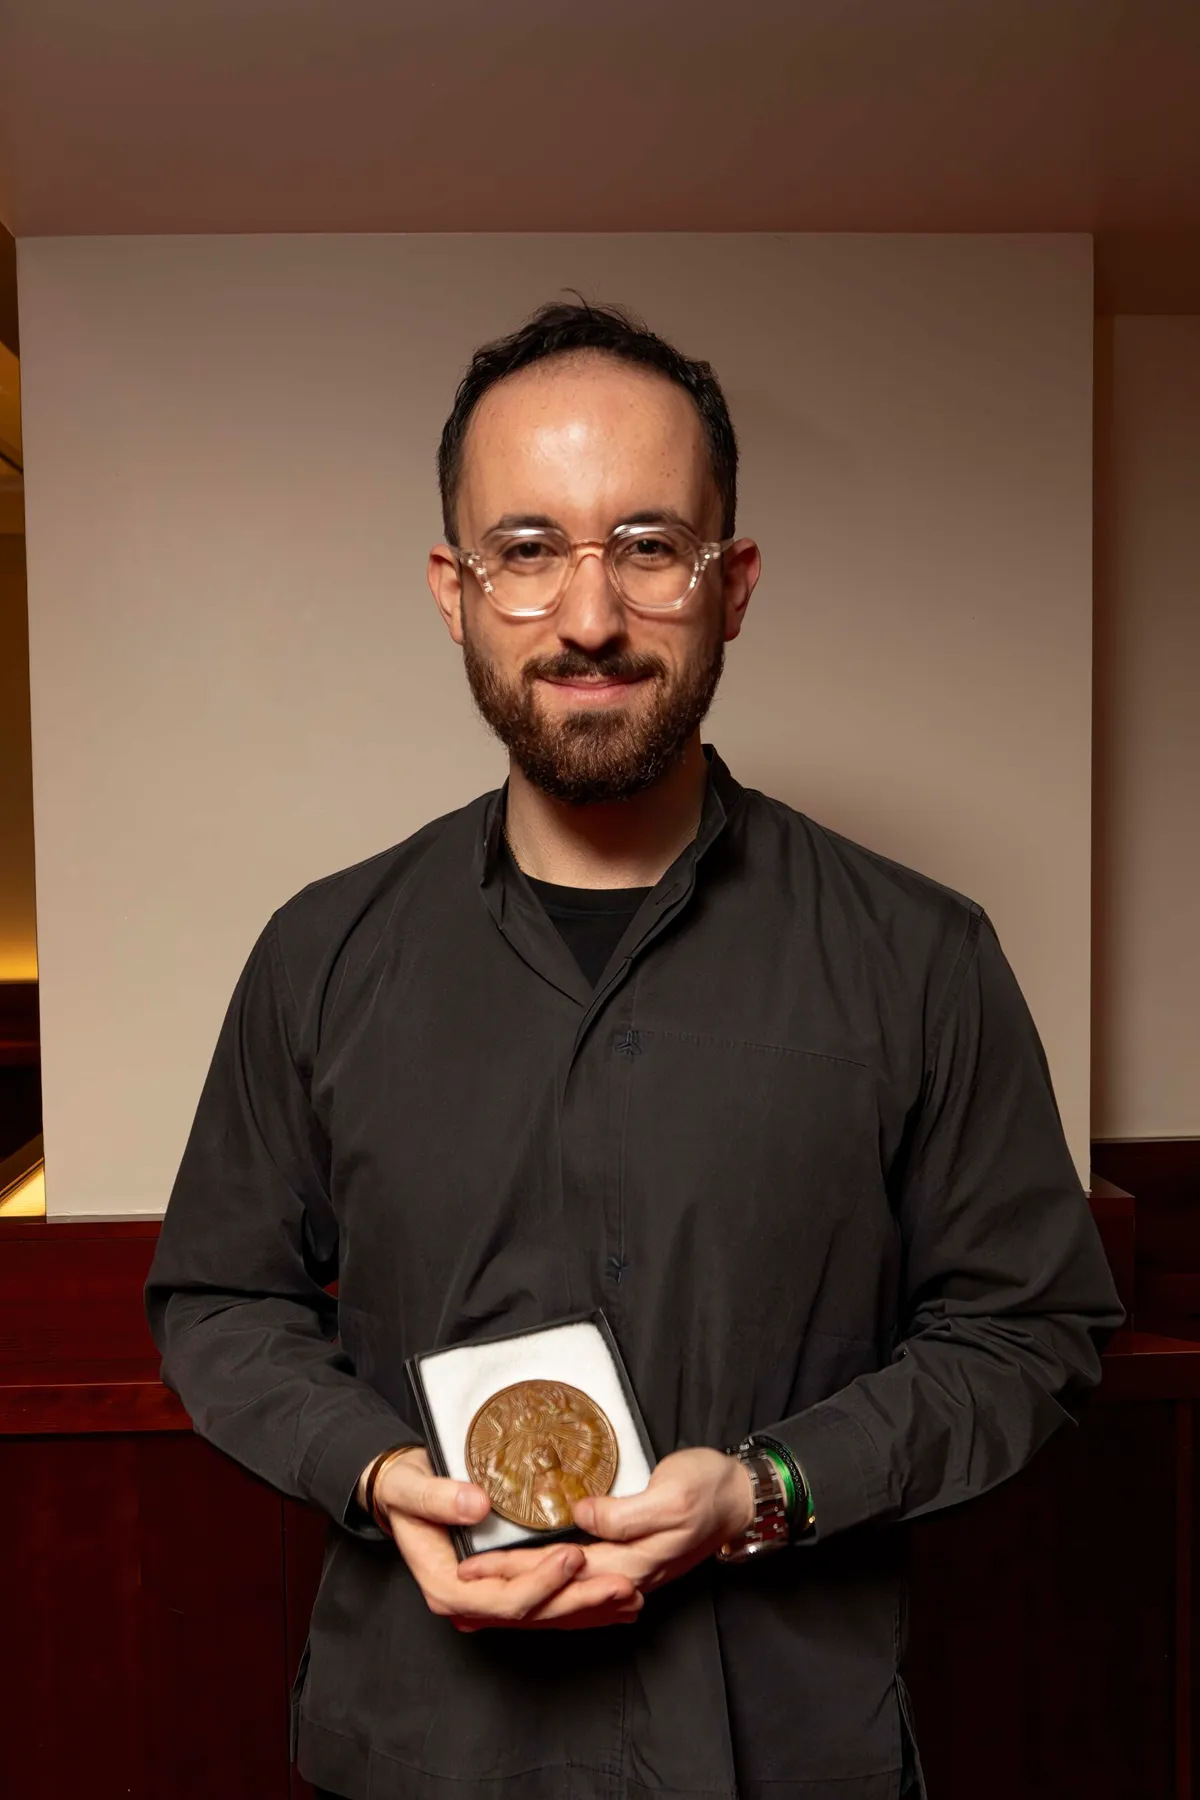 A portrait of pianist Igor Levit holding the Wigmore Hall Medal